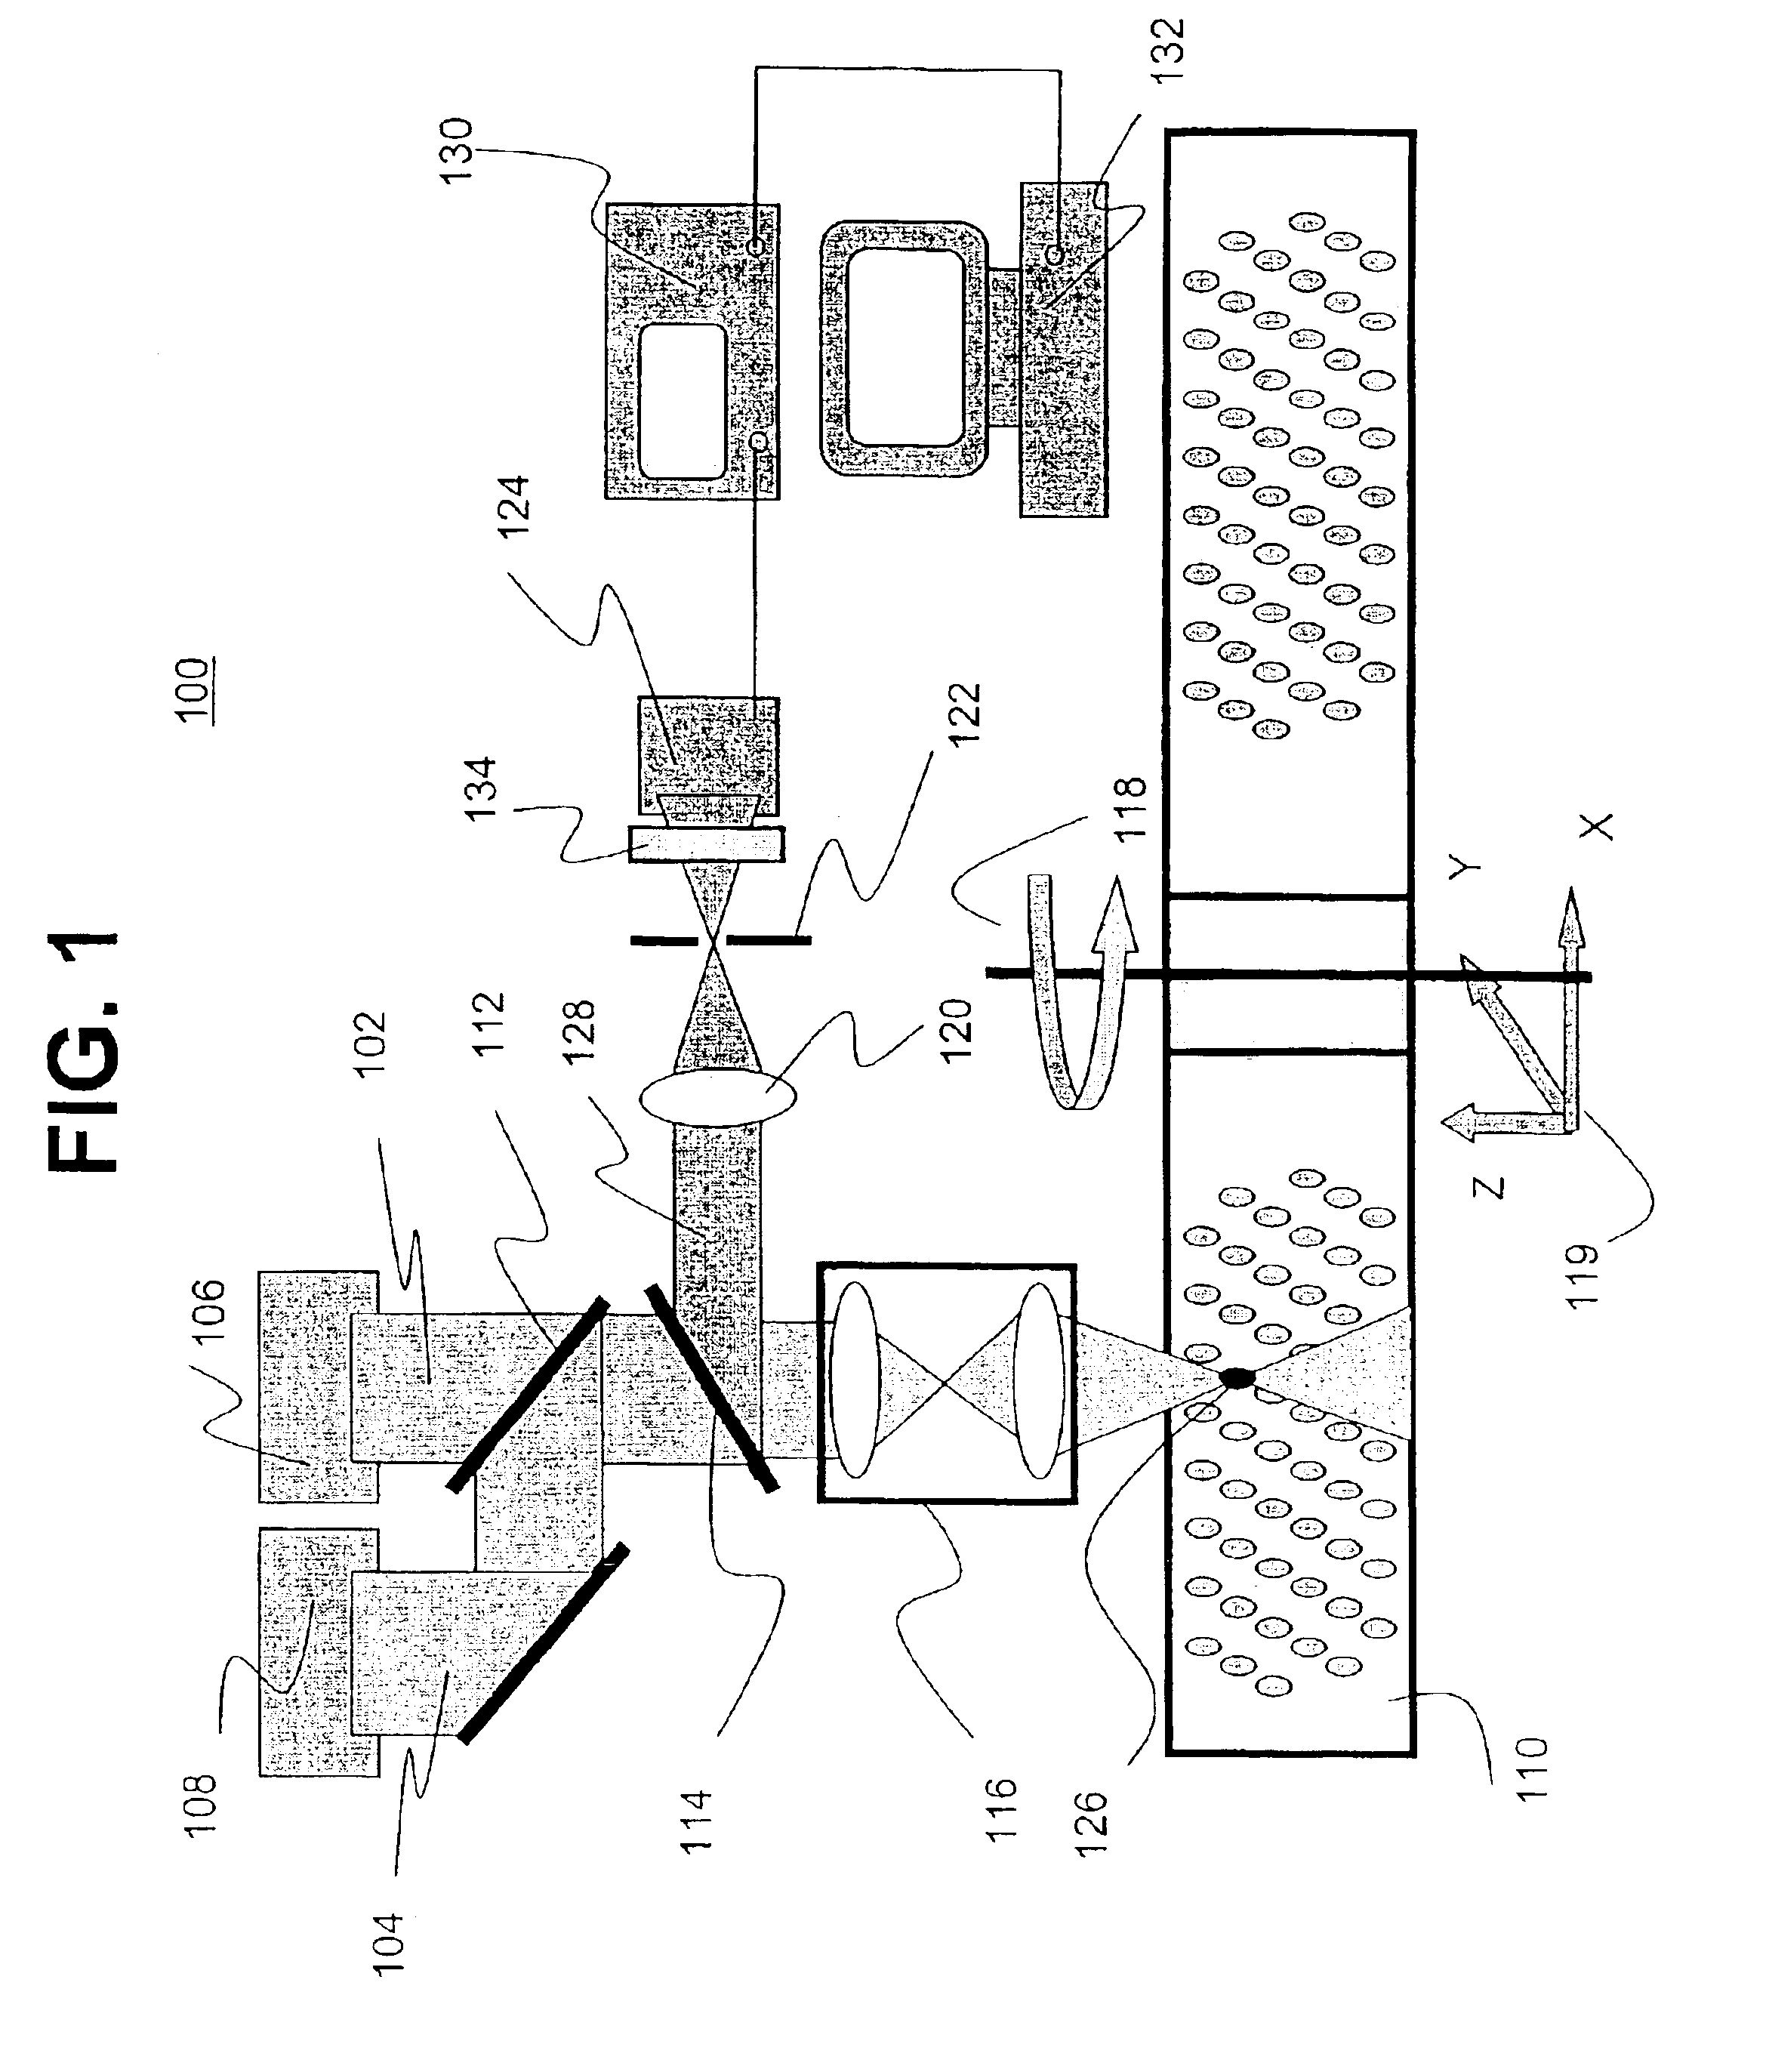 Method for thermally erasing information stored in an aluminum oxide data storage medium